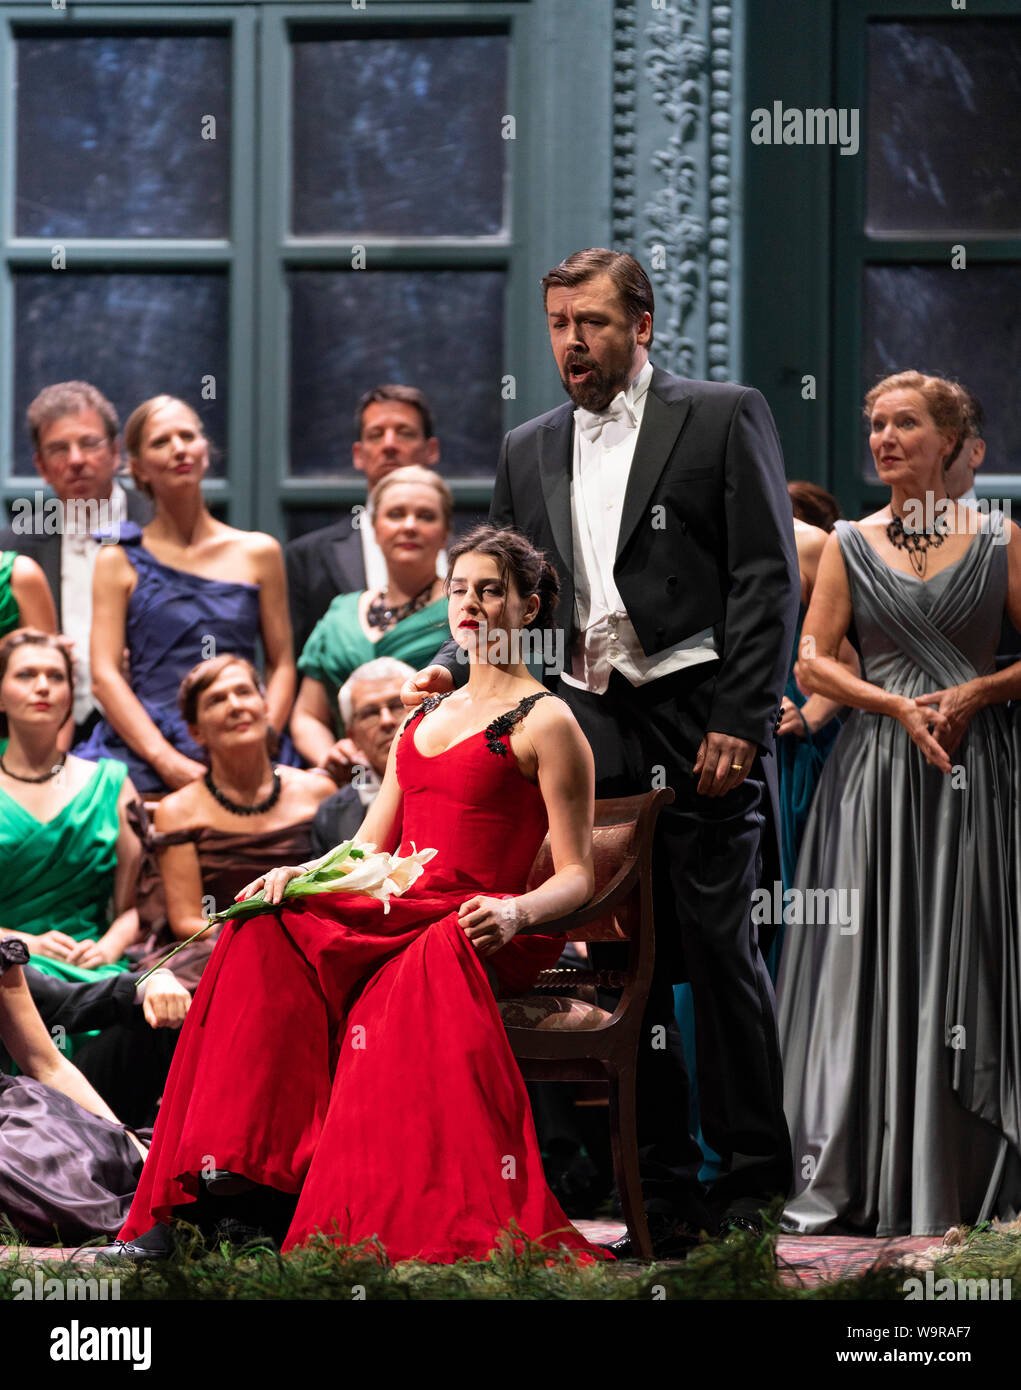 Edinburgh, Scotland, UK. 14 August 2019. Preview performance of Tchaikovsky’s opera Eugene Onegin by the Komische Oper Berlin in the Festival Theatre as part of the Edinburgh International Festival.  Komische Oper Berlin return to the International Festival for Tchaikovsky’s best-loved opera, based on Alexander Pushkin’s classic verse novel. Tchaikovsky’s heart-breaking love story uses the author’s poetry to create lyrical scenes that contrast the austerities of country life with the excesses and opulence of the Russian imperial court. Iain Masterton/Alamy Live News Stock Photo